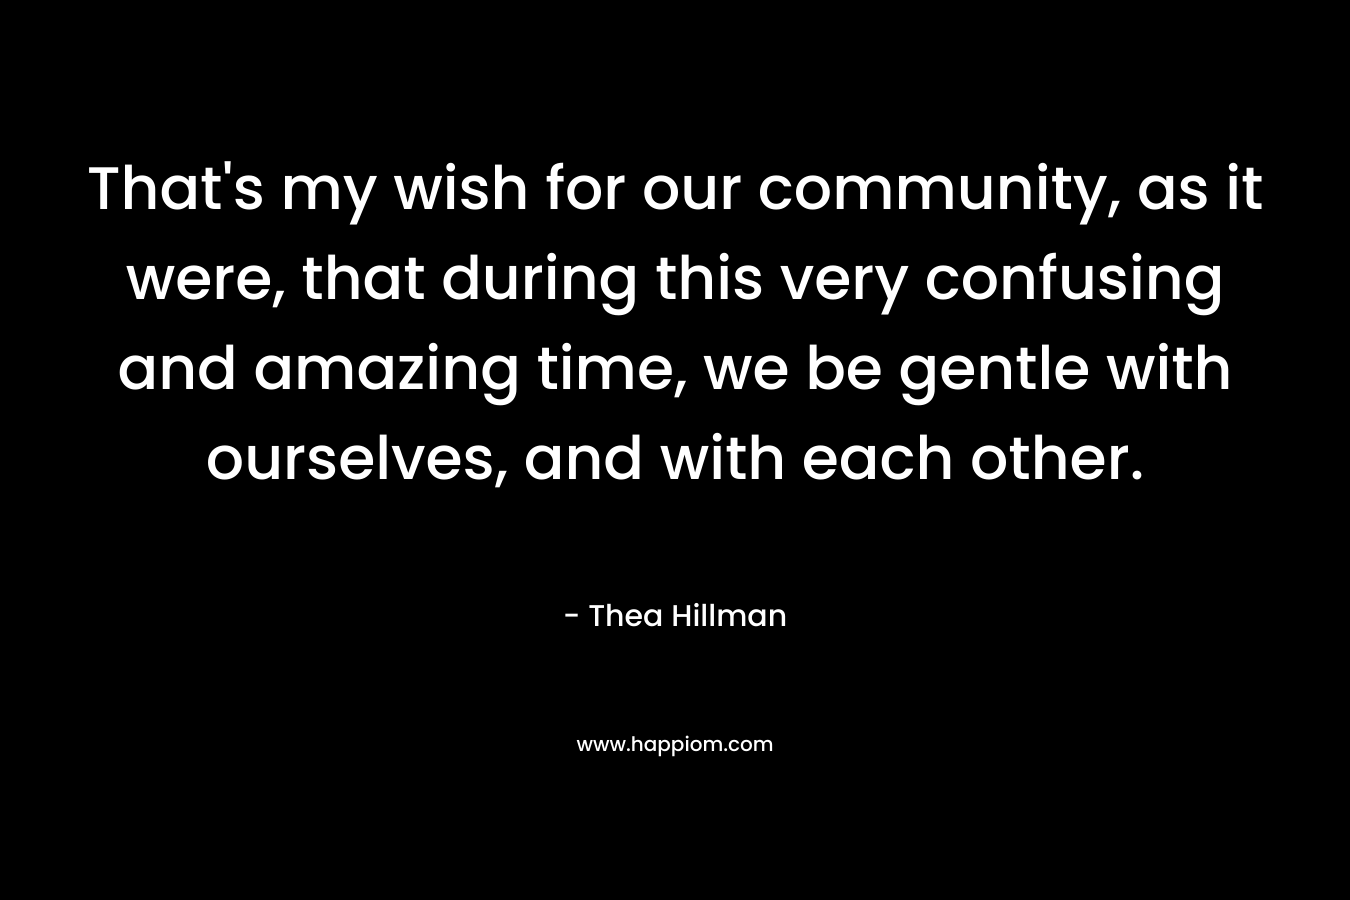 That’s my wish for our community, as it were, that during this very confusing and amazing time, we be gentle with ourselves, and with each other. – Thea Hillman